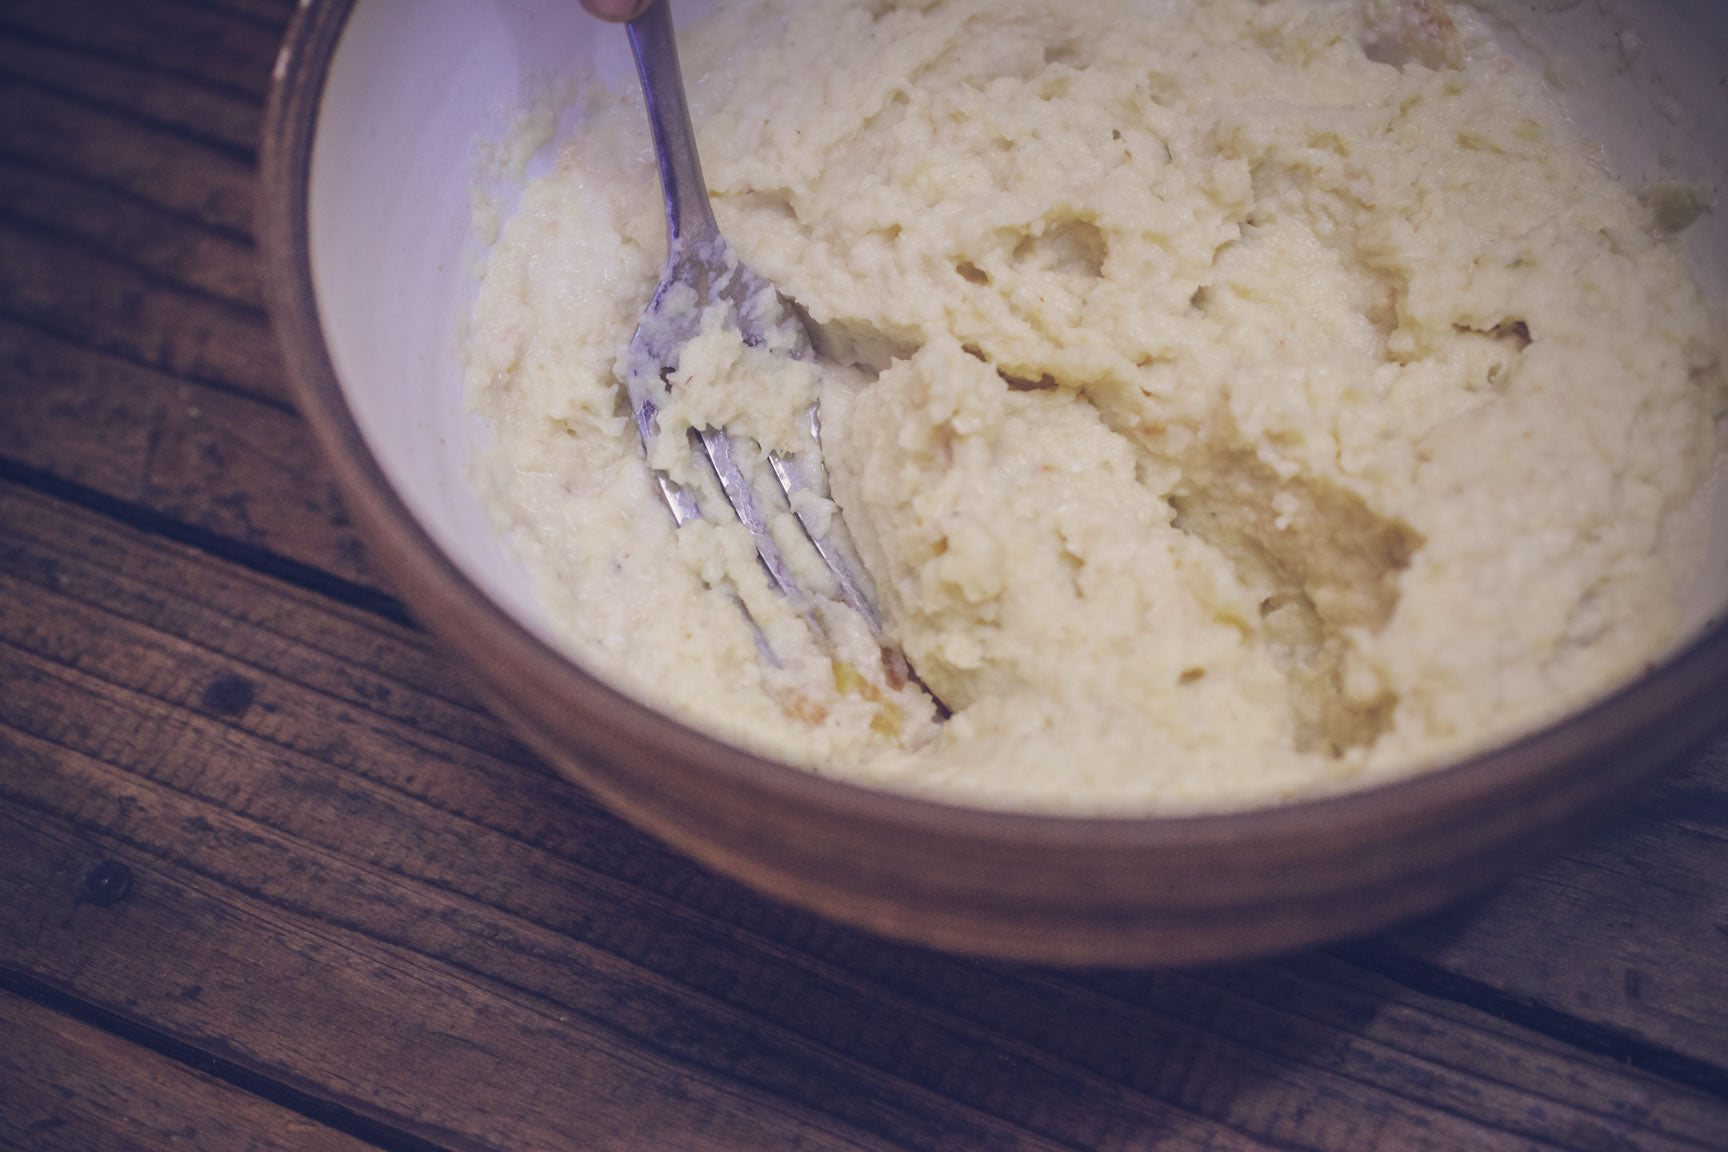 mash with a fork or food processor